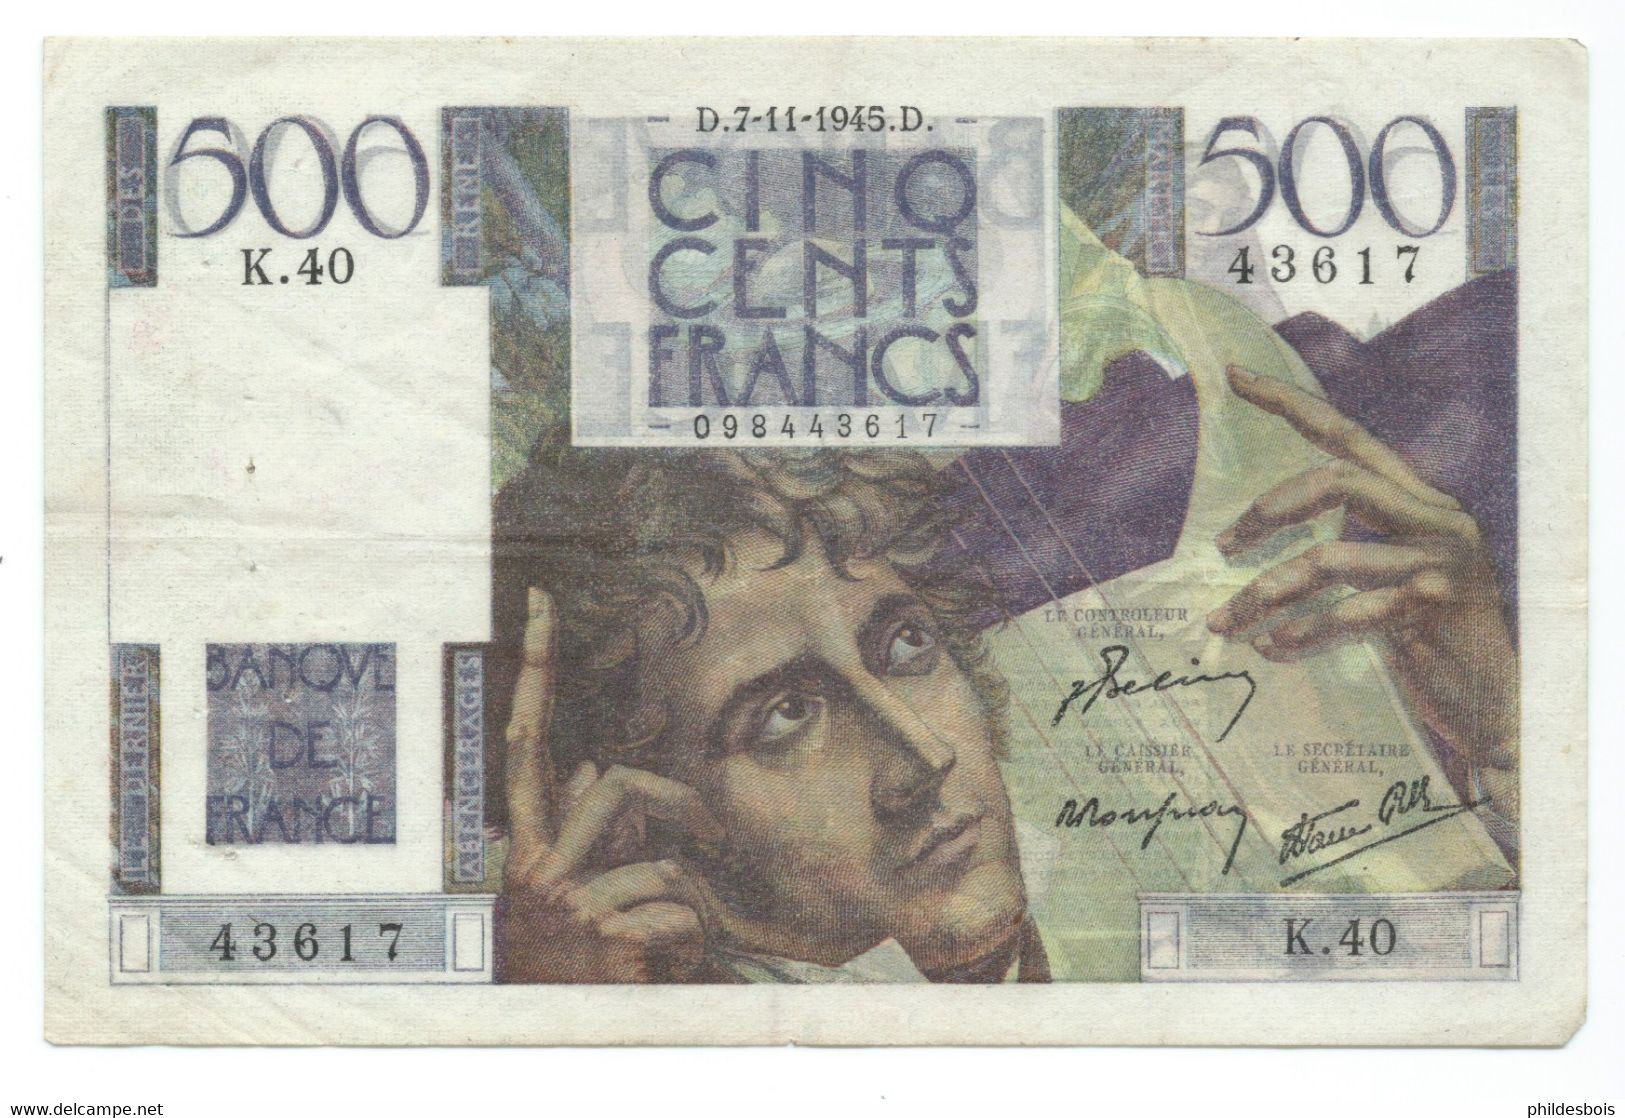 BILLET FRANCE 500 Francs, 500 F CHATEAUBRIAND 7/11/1945 D  TB - 500 F 1945-1953 ''Chateaubriand''